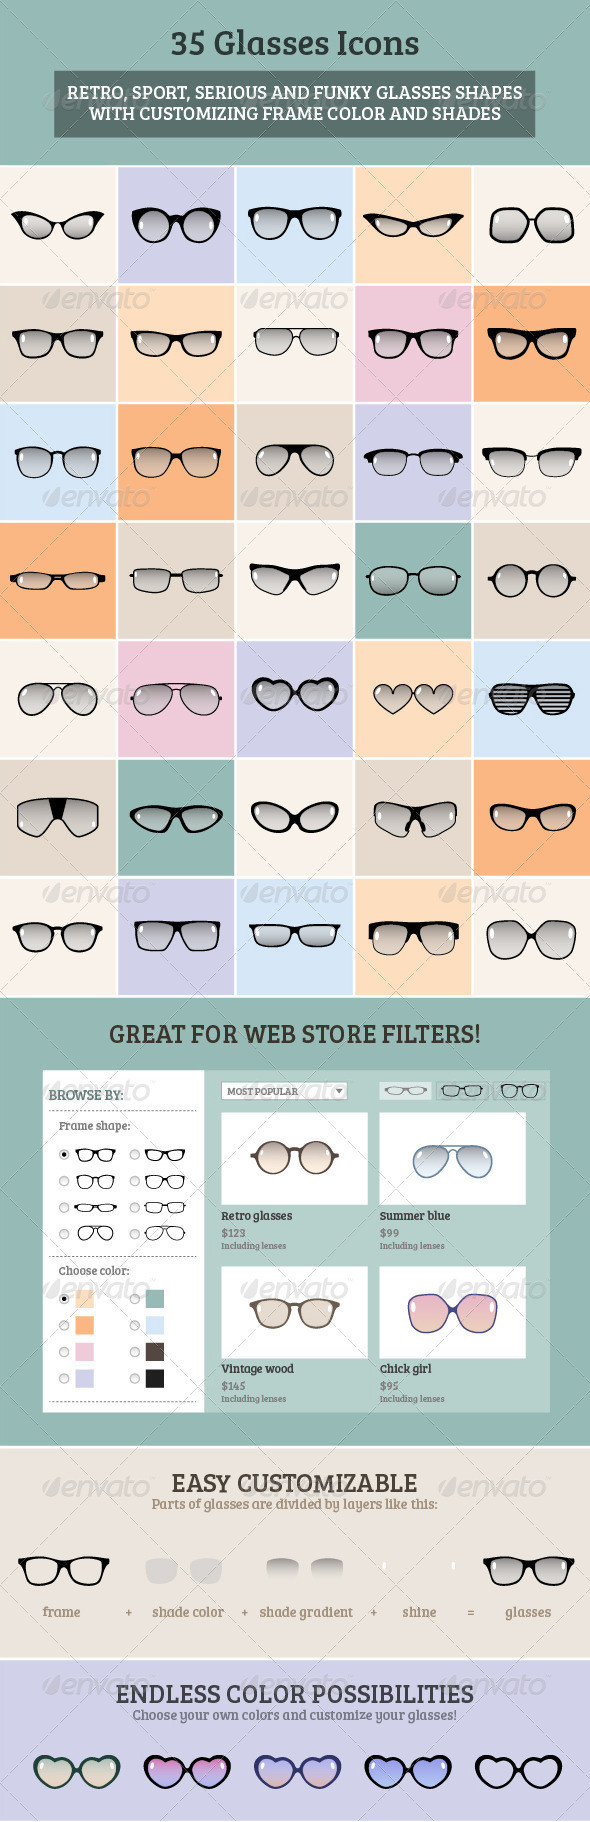 35 glasses icons set cover 01